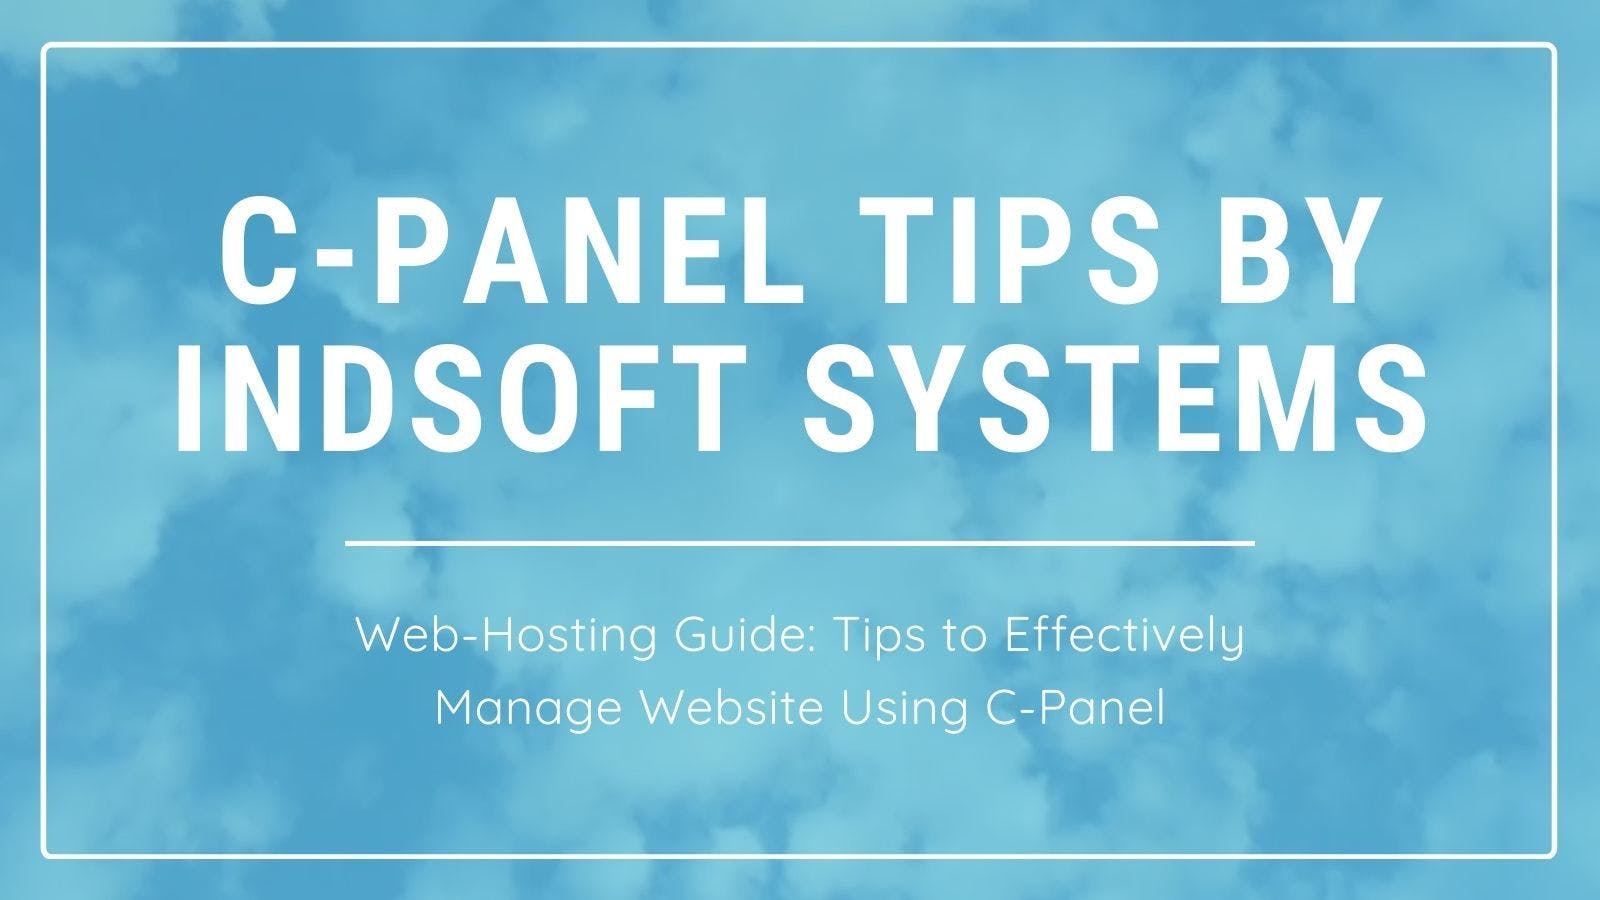 /9-tips-to-effectively-manage-your-website-using-cpanel-g02v33ex feature image